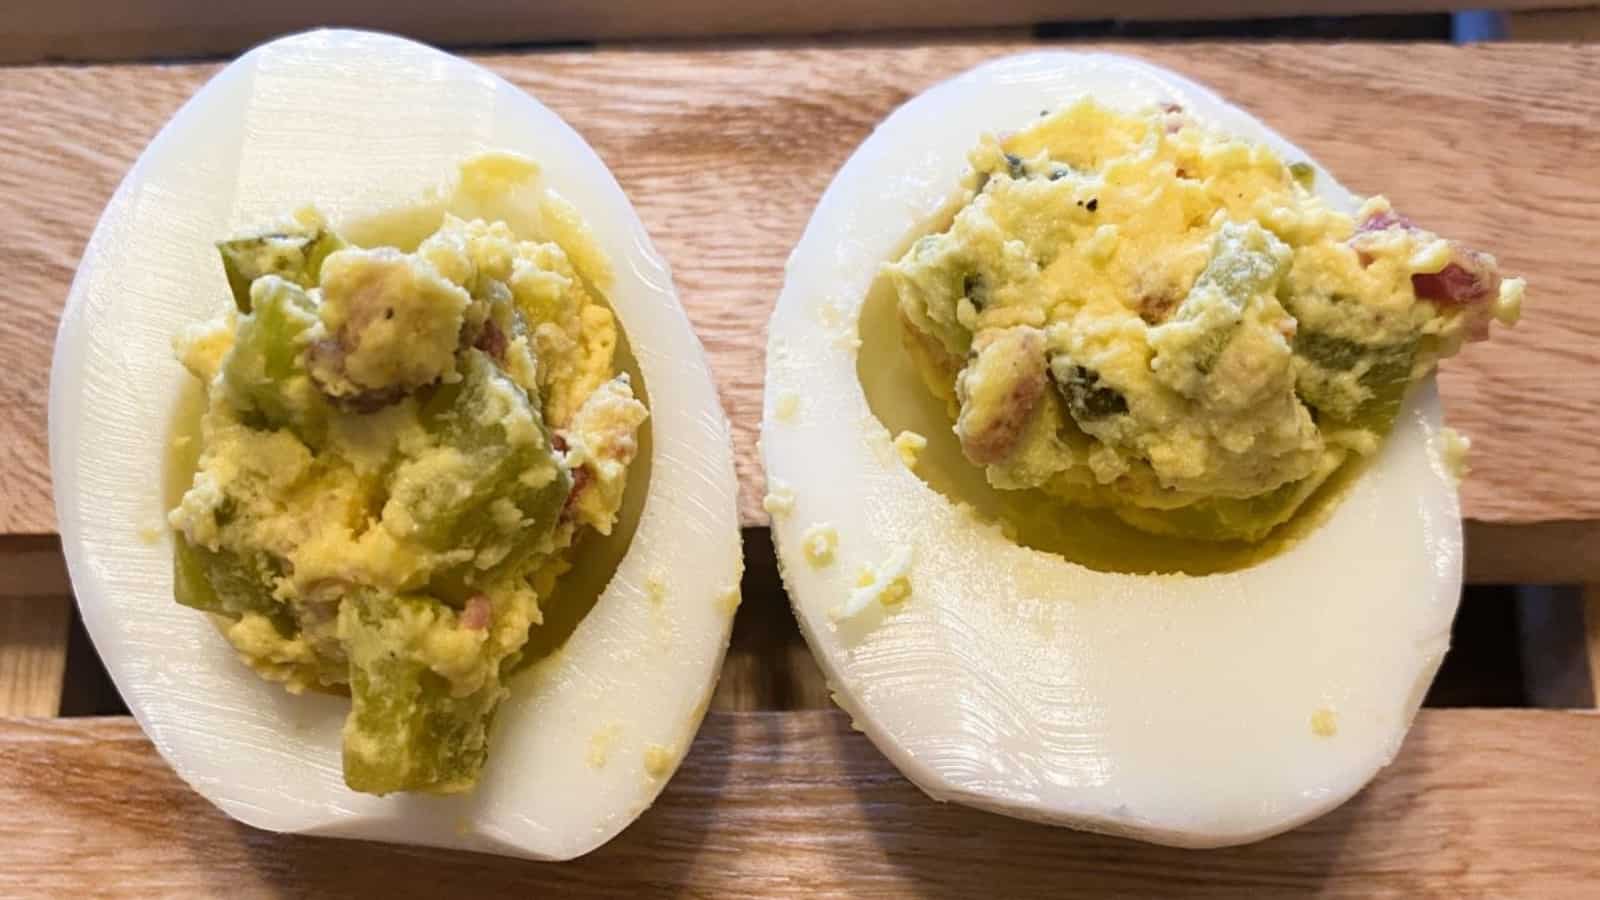 Two deviled eggs on a wooden table.